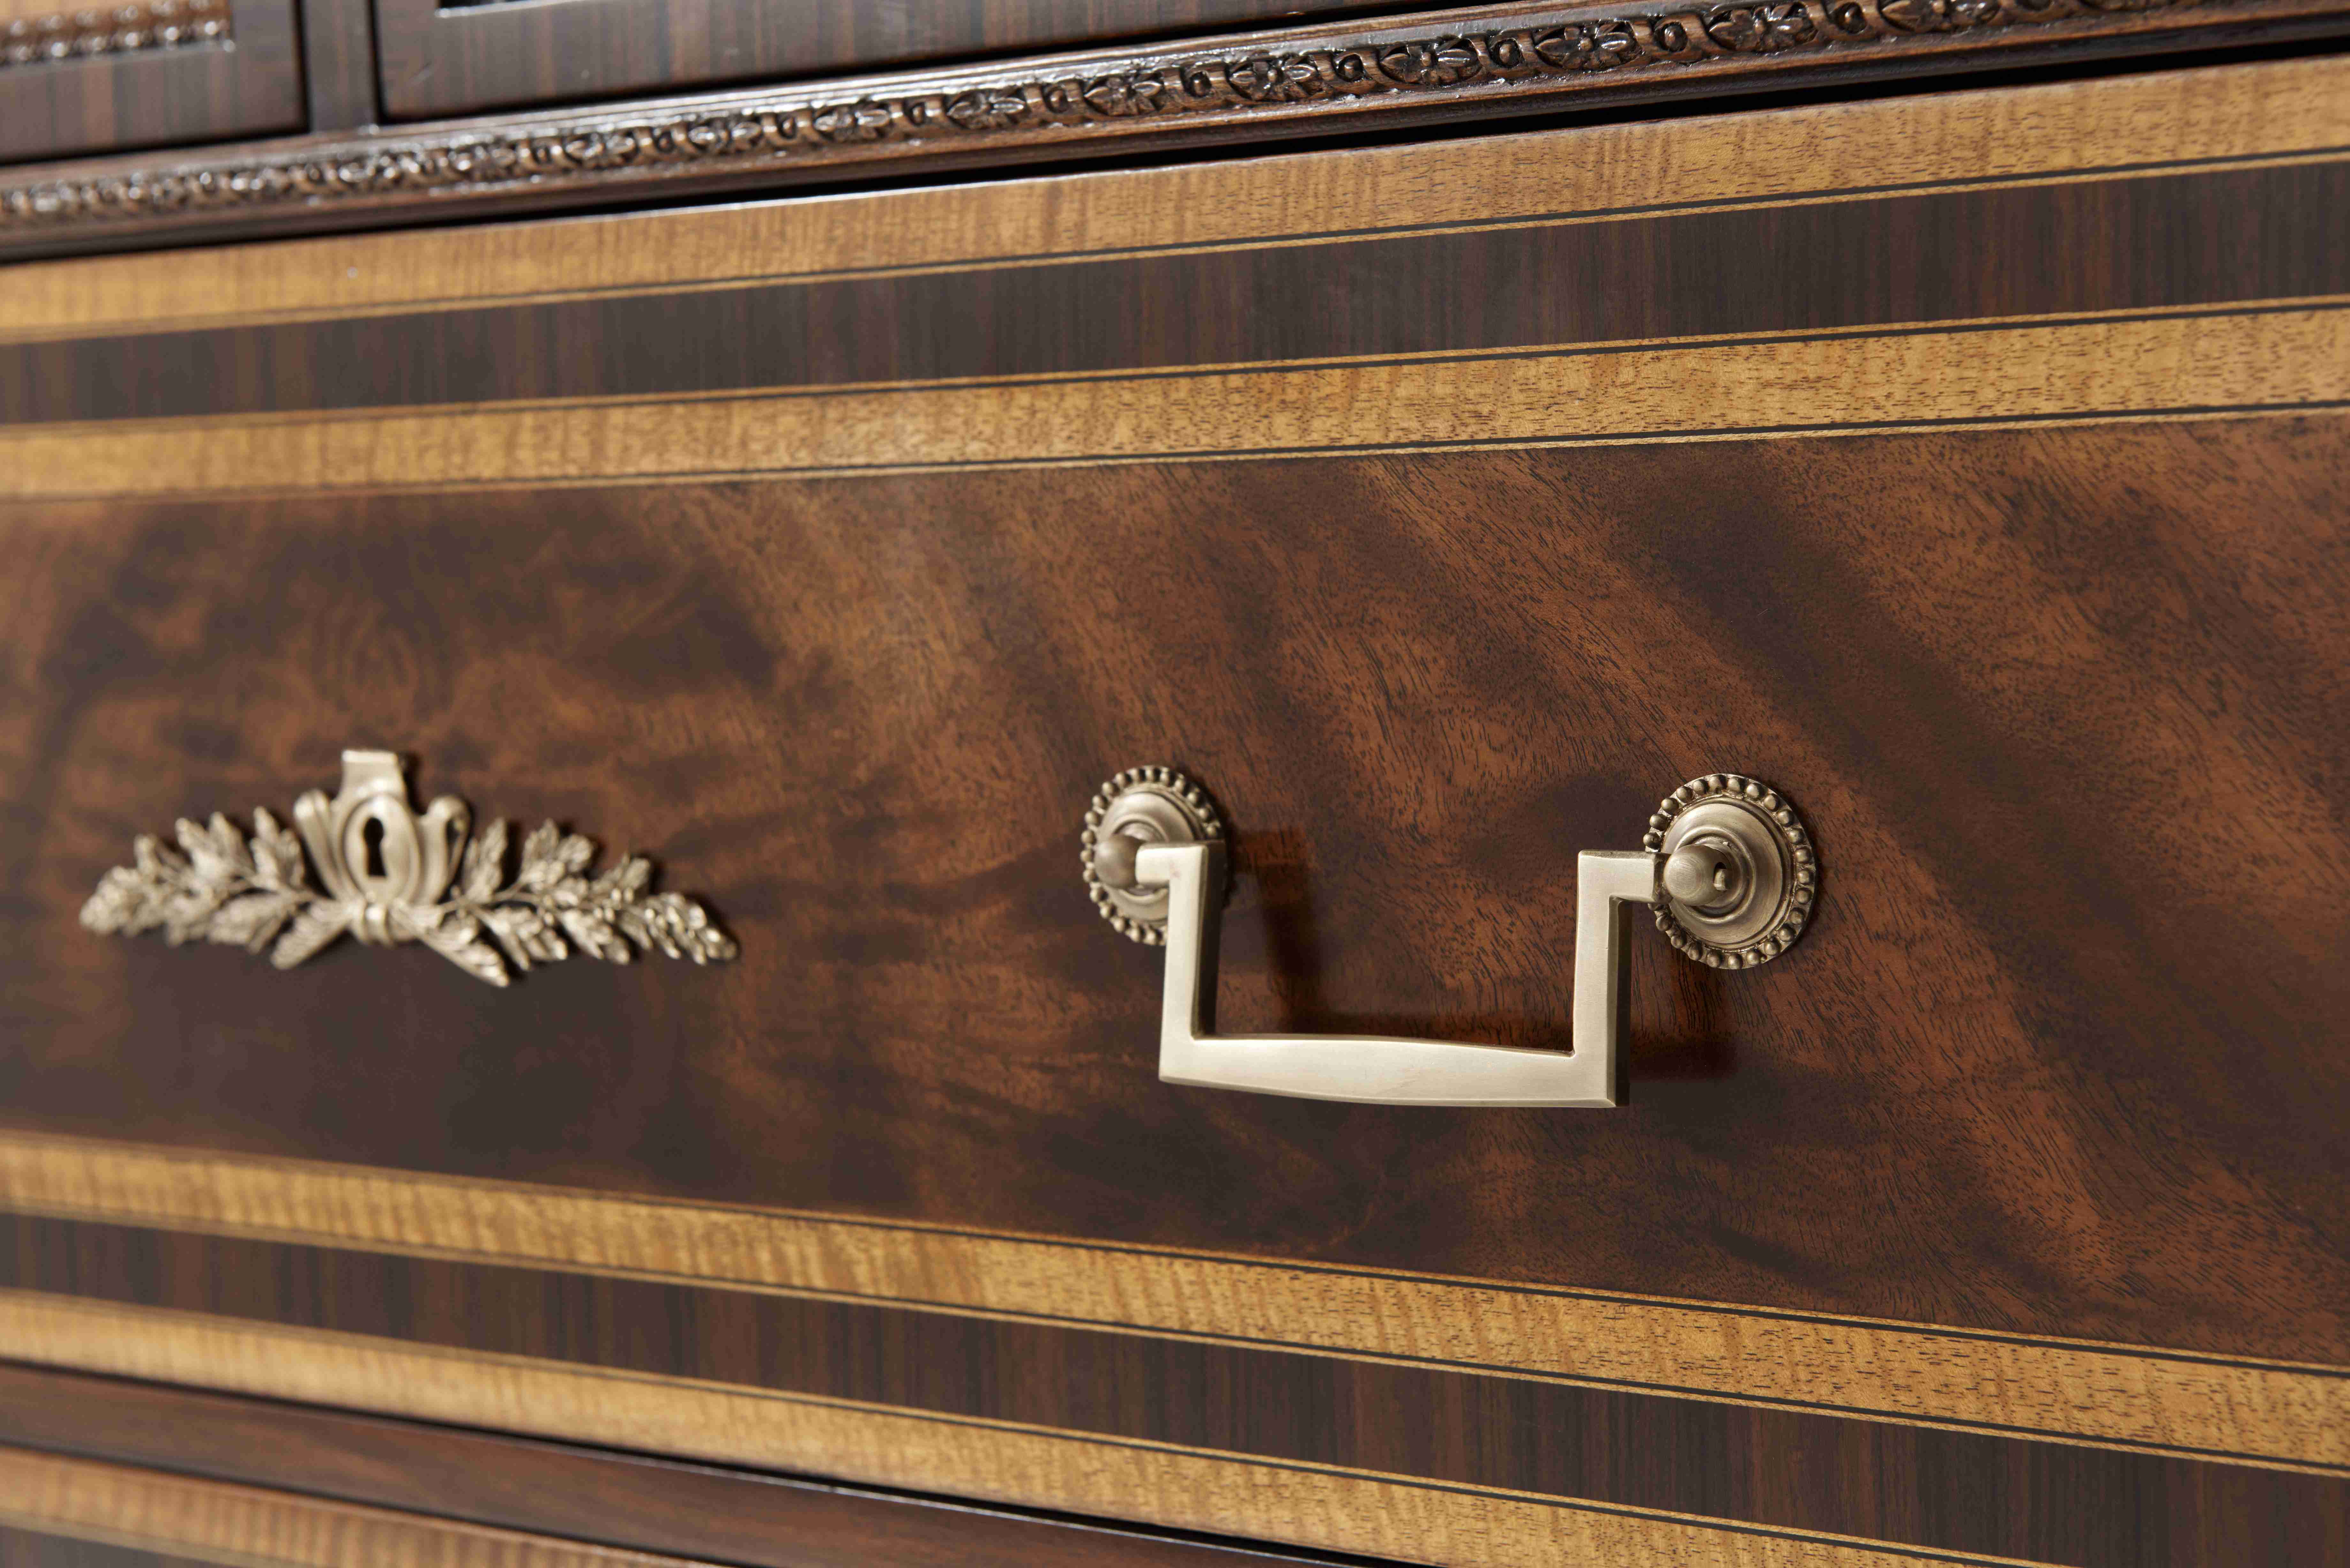 VISCOUNT'S CHEST OF DRAWERS